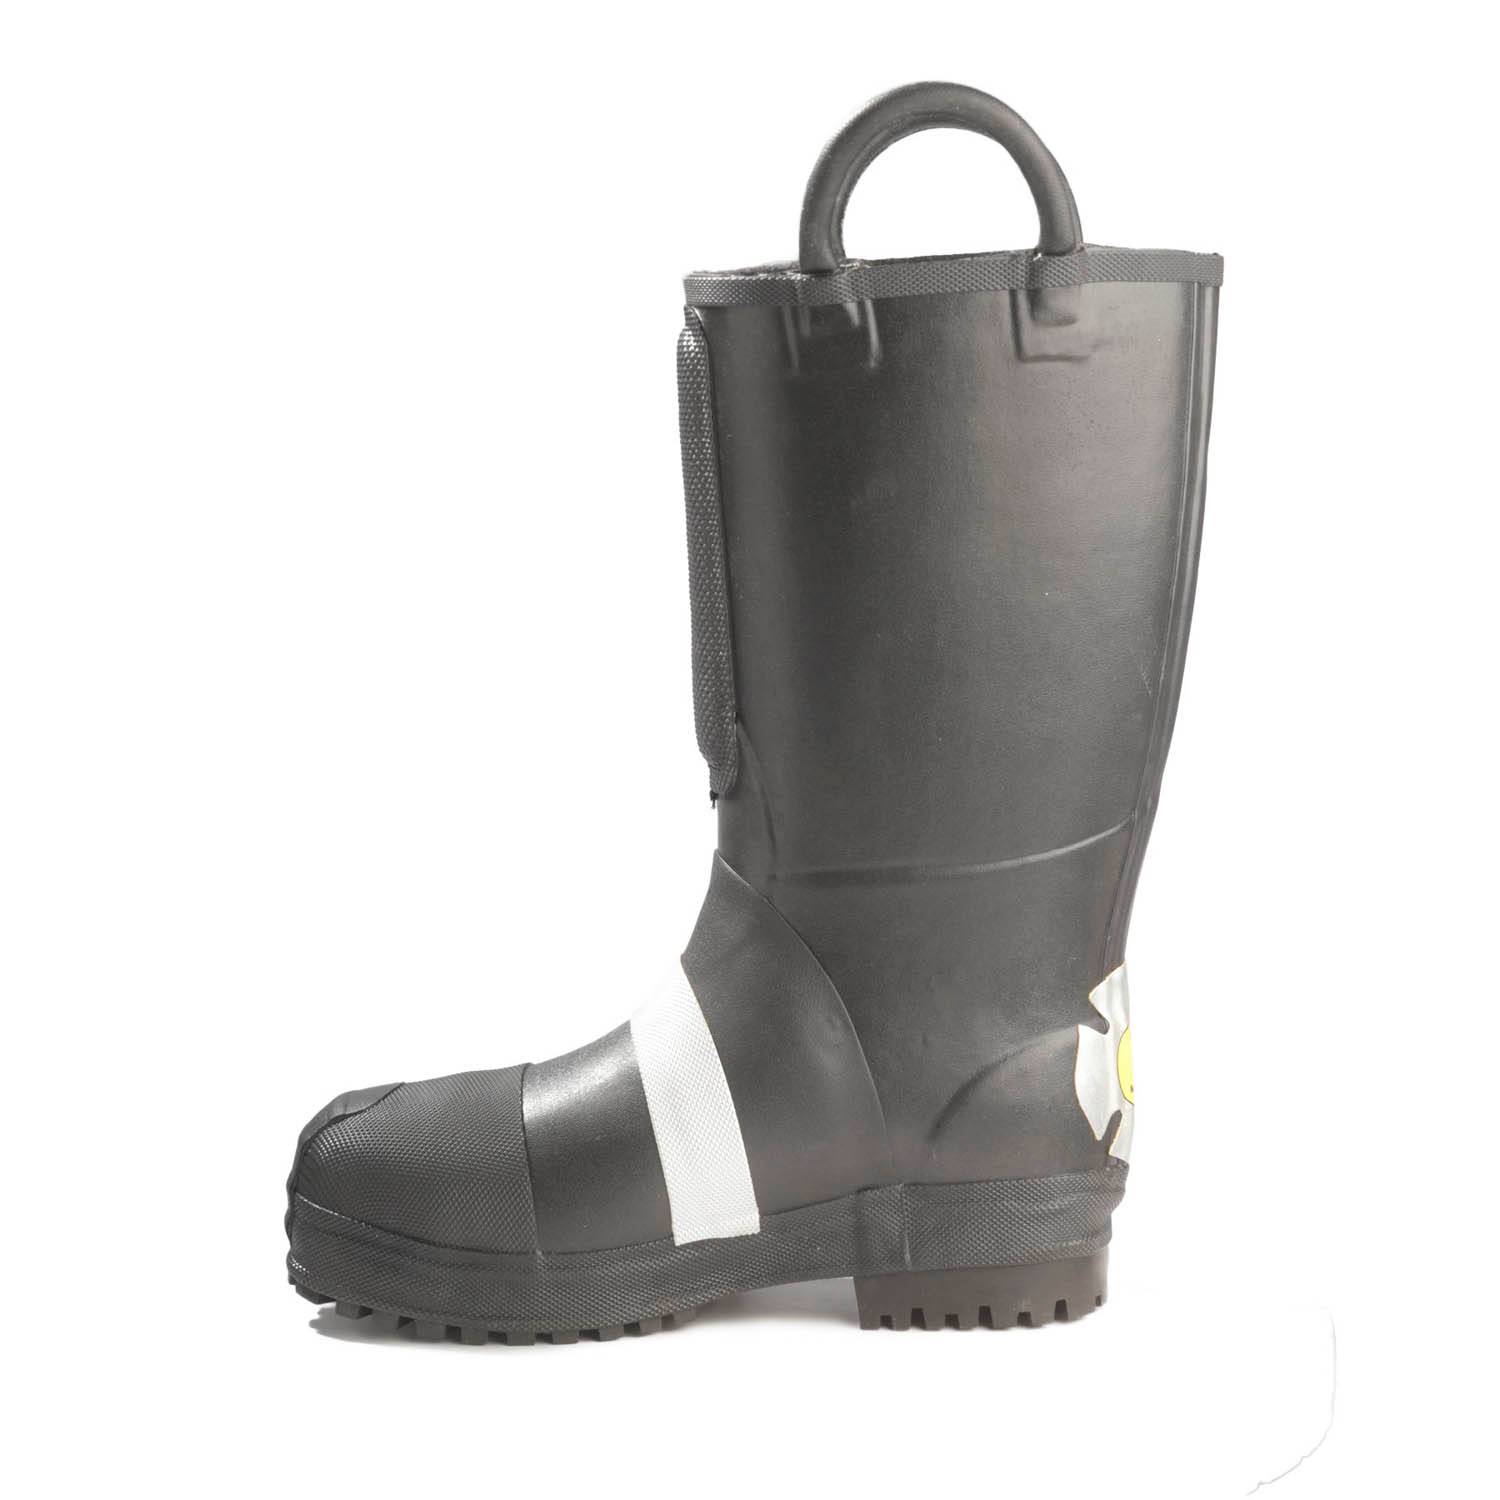 Insulated Firefighter Boots,11M,Steel,PR 807-6003 11M 